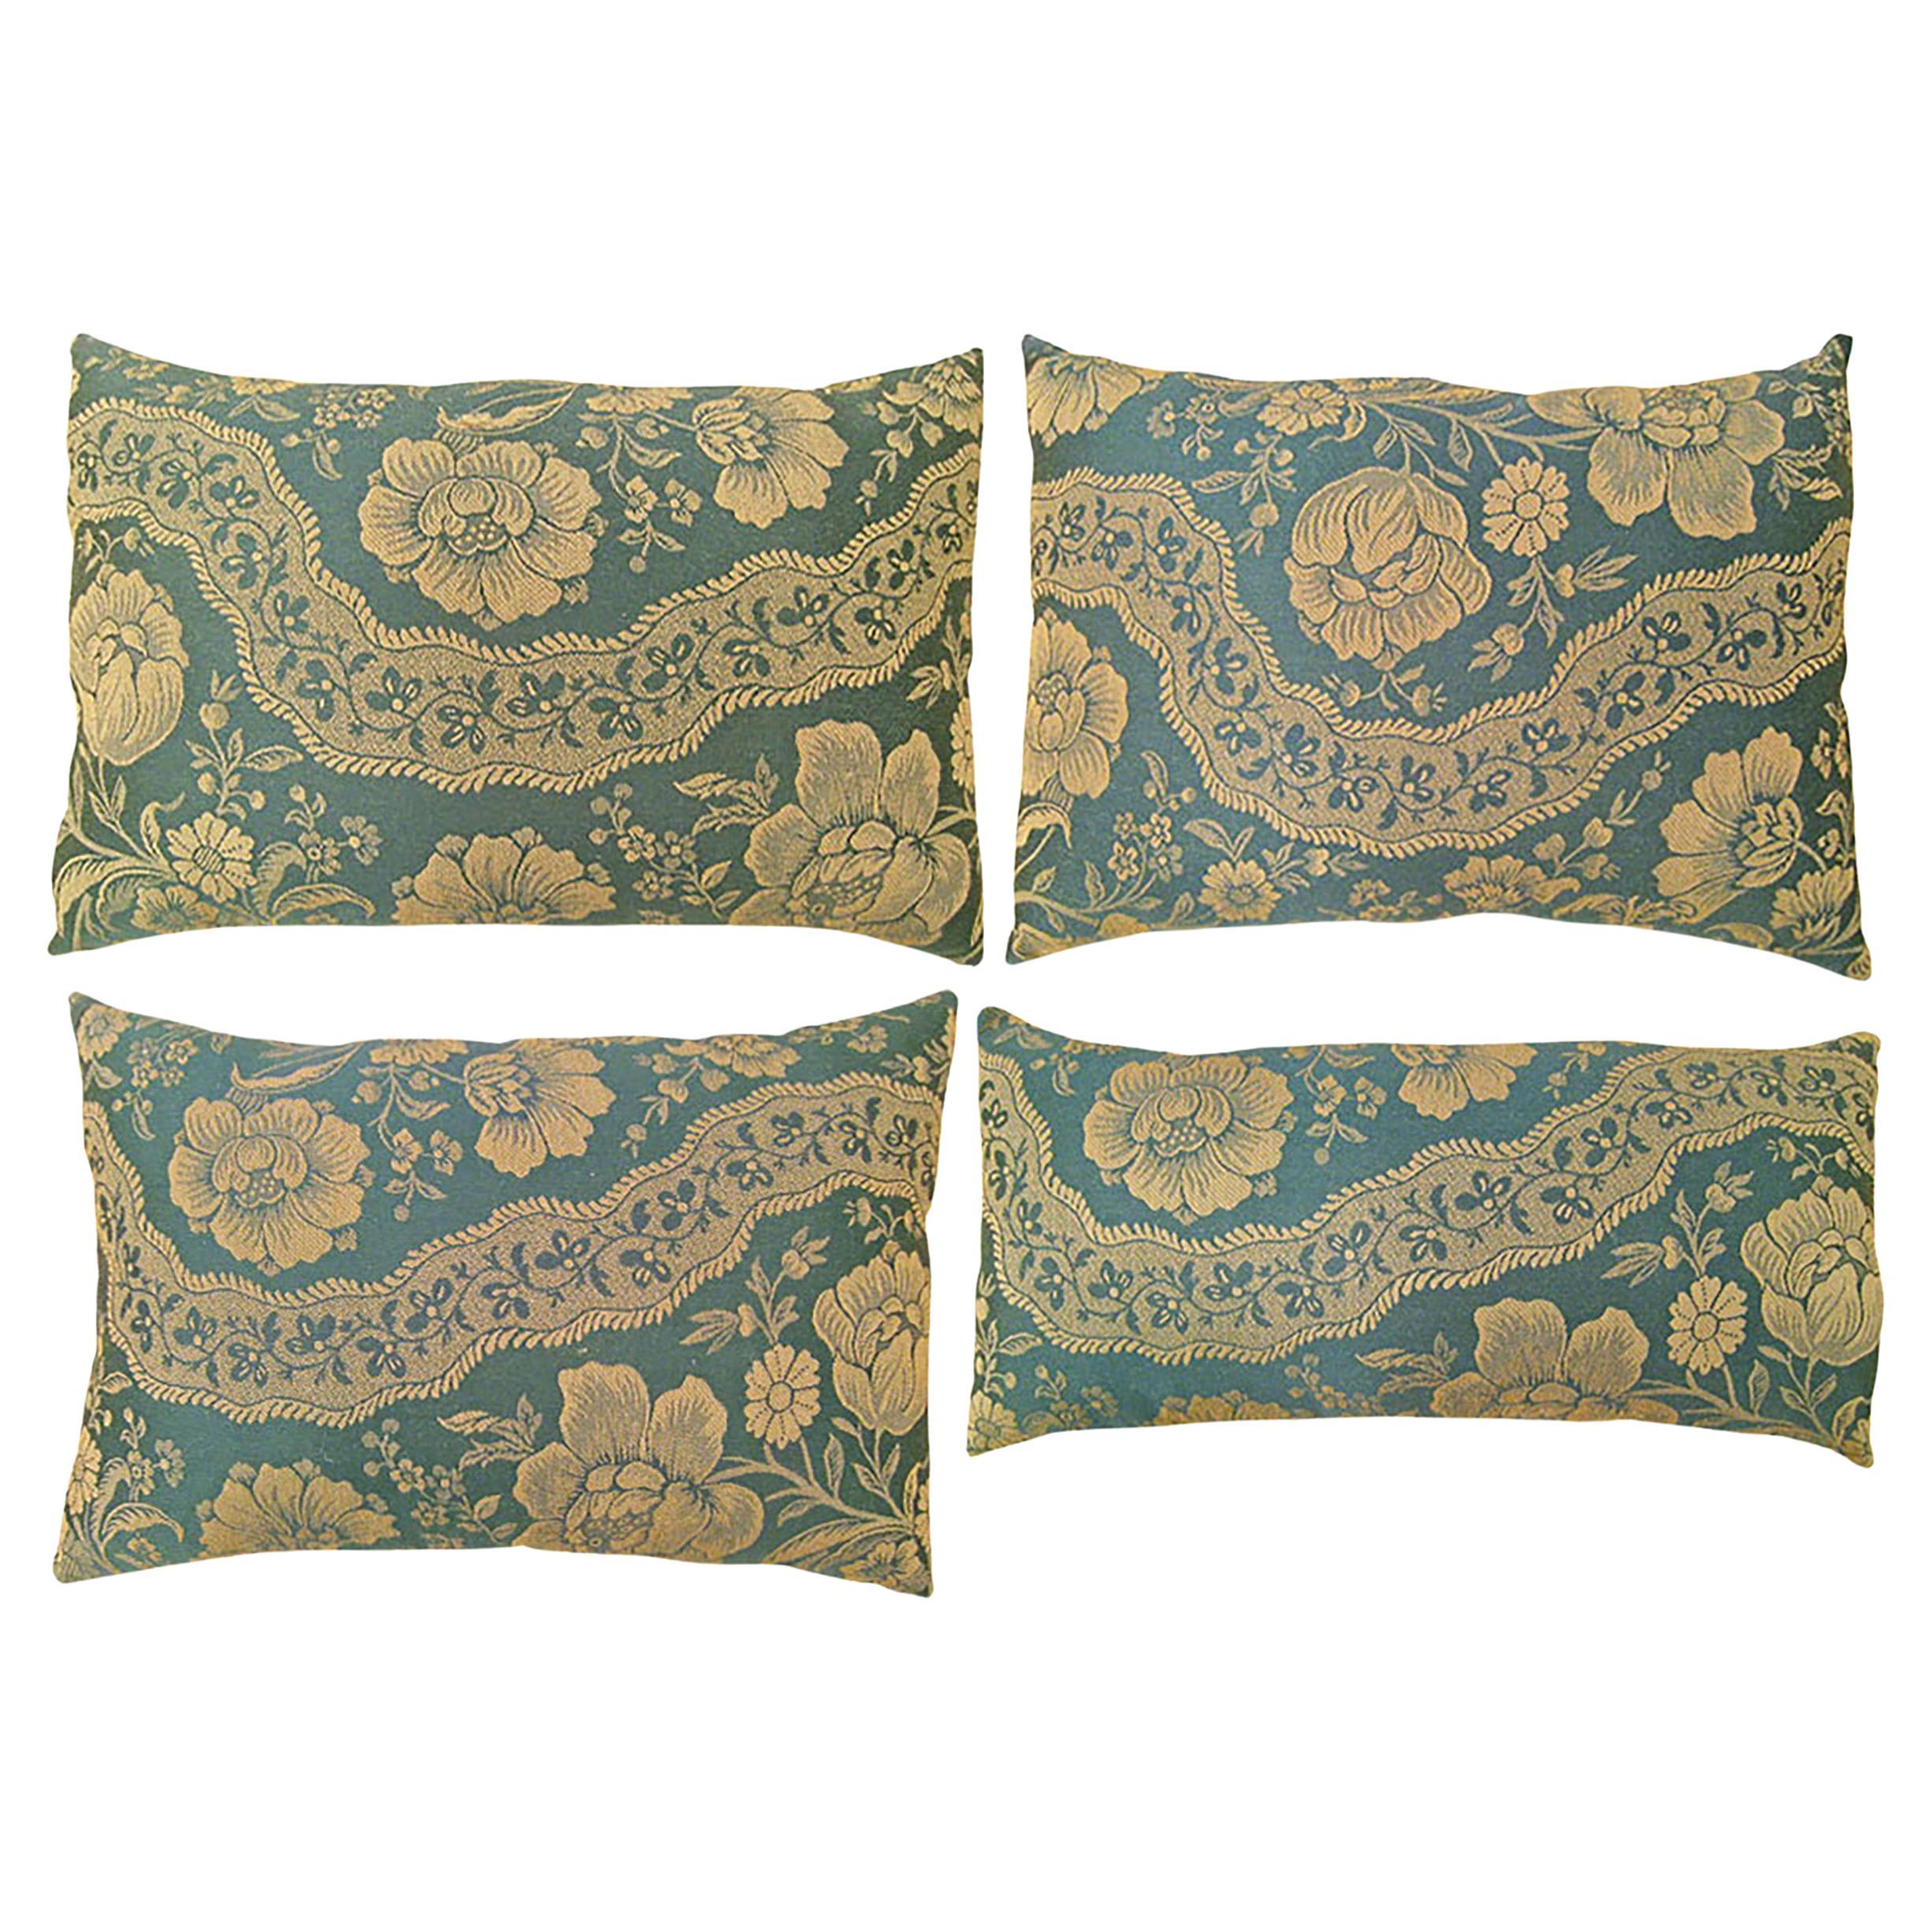 Set of Decorative Vintage European Chinoiserie Fabric Pillows with Floral For Sale